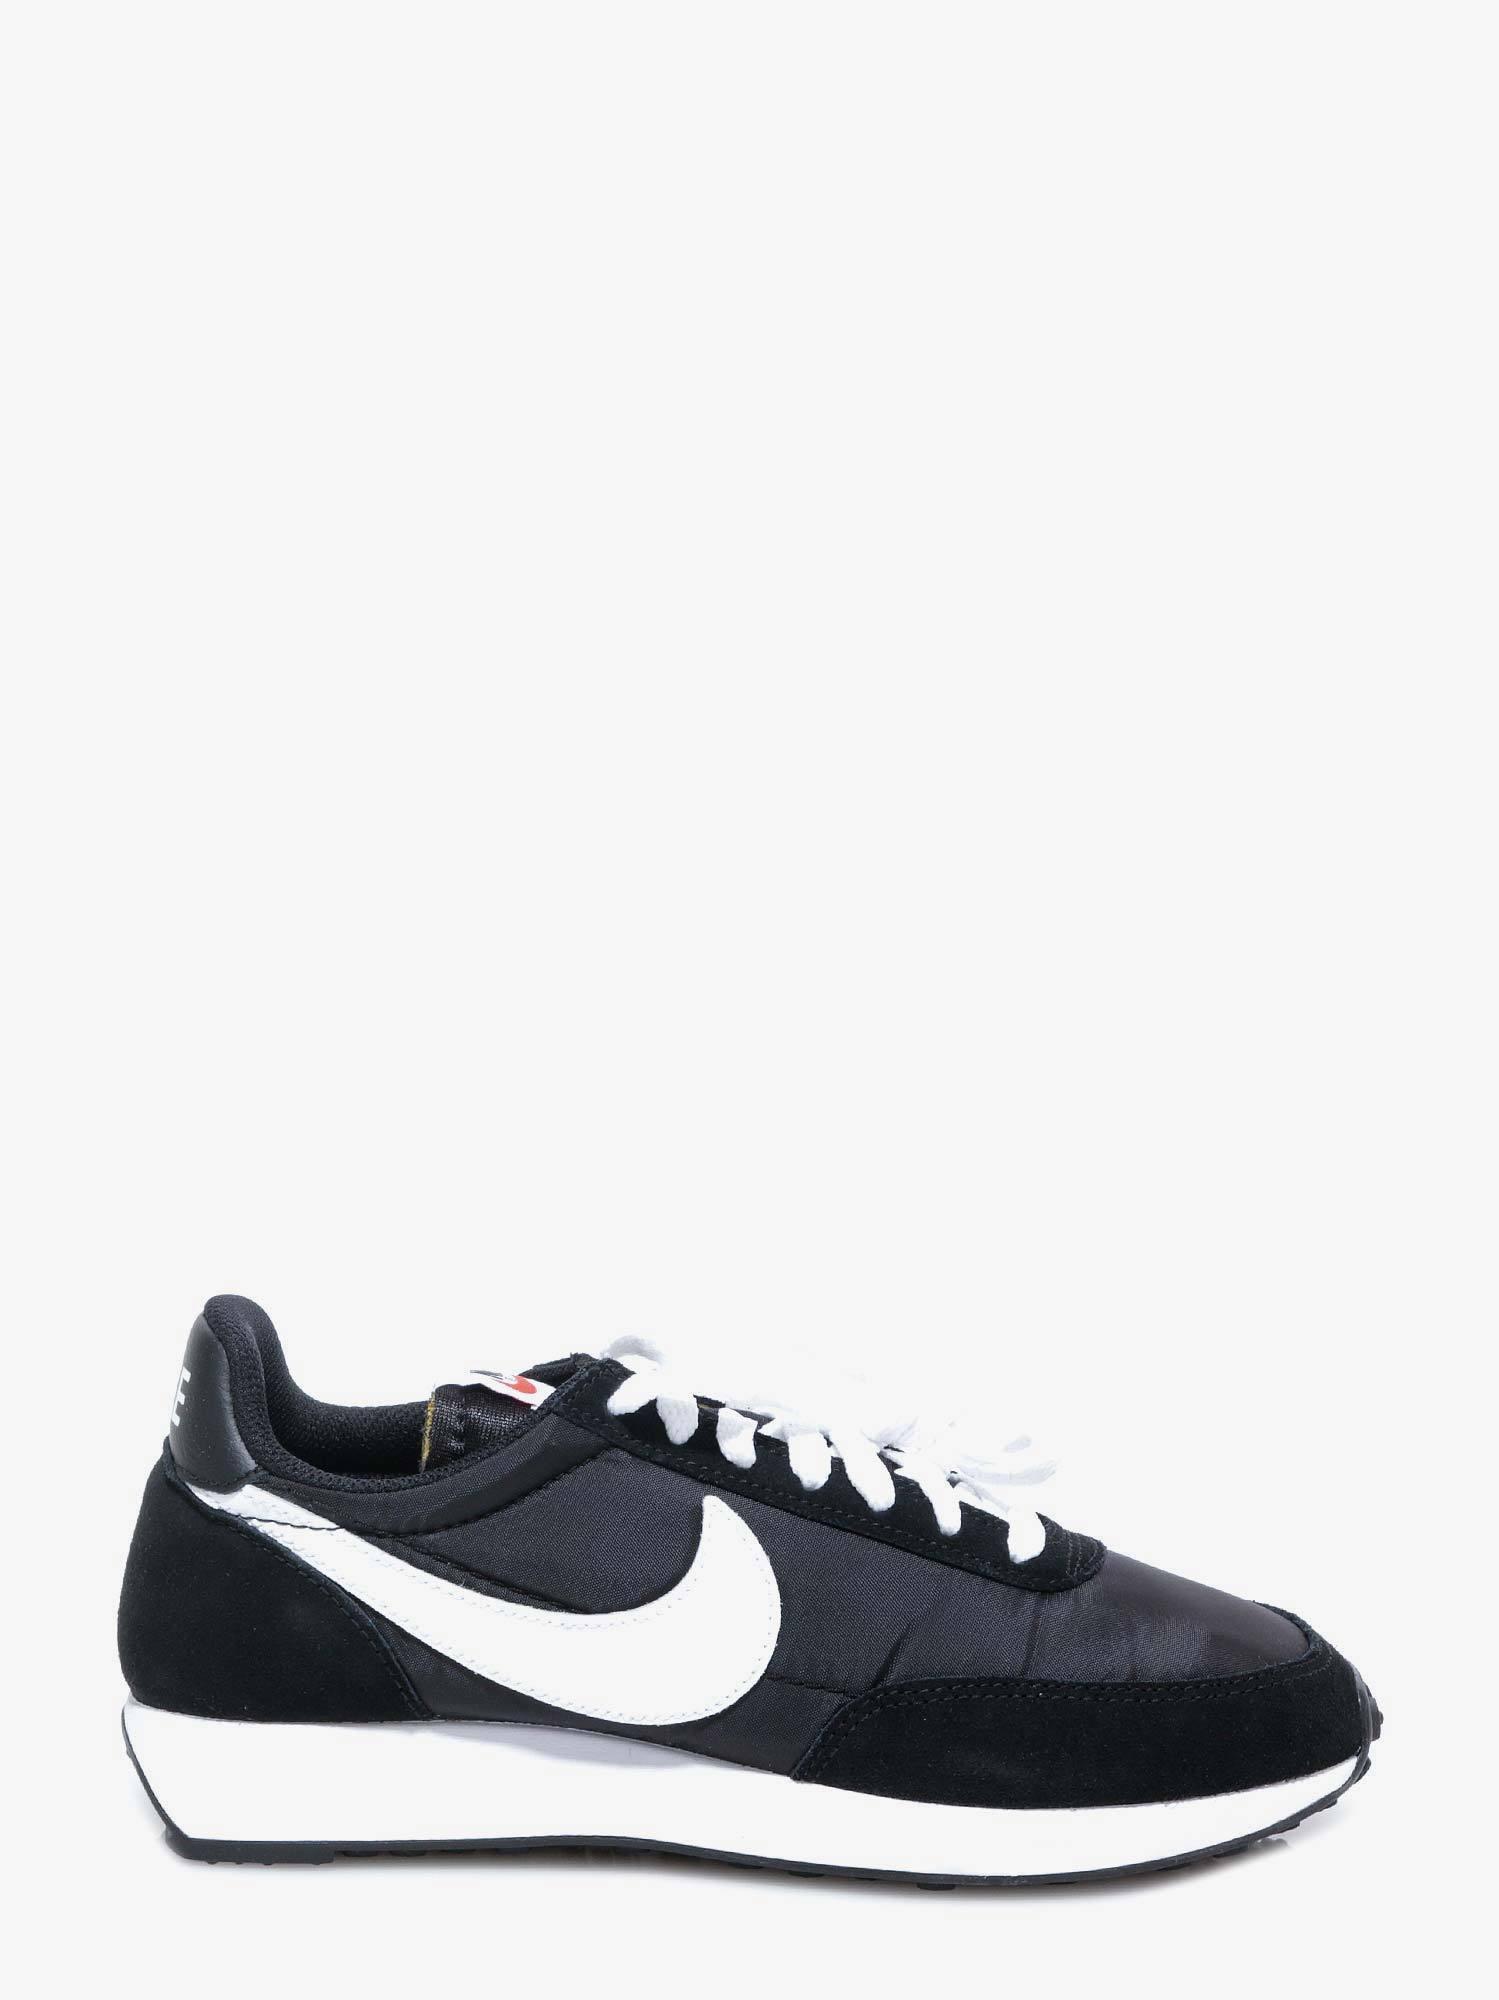 Nike Synthetic Air Tailwind '79 - Shoes in Black/White (Black) for Men -  Save 61% - Lyst